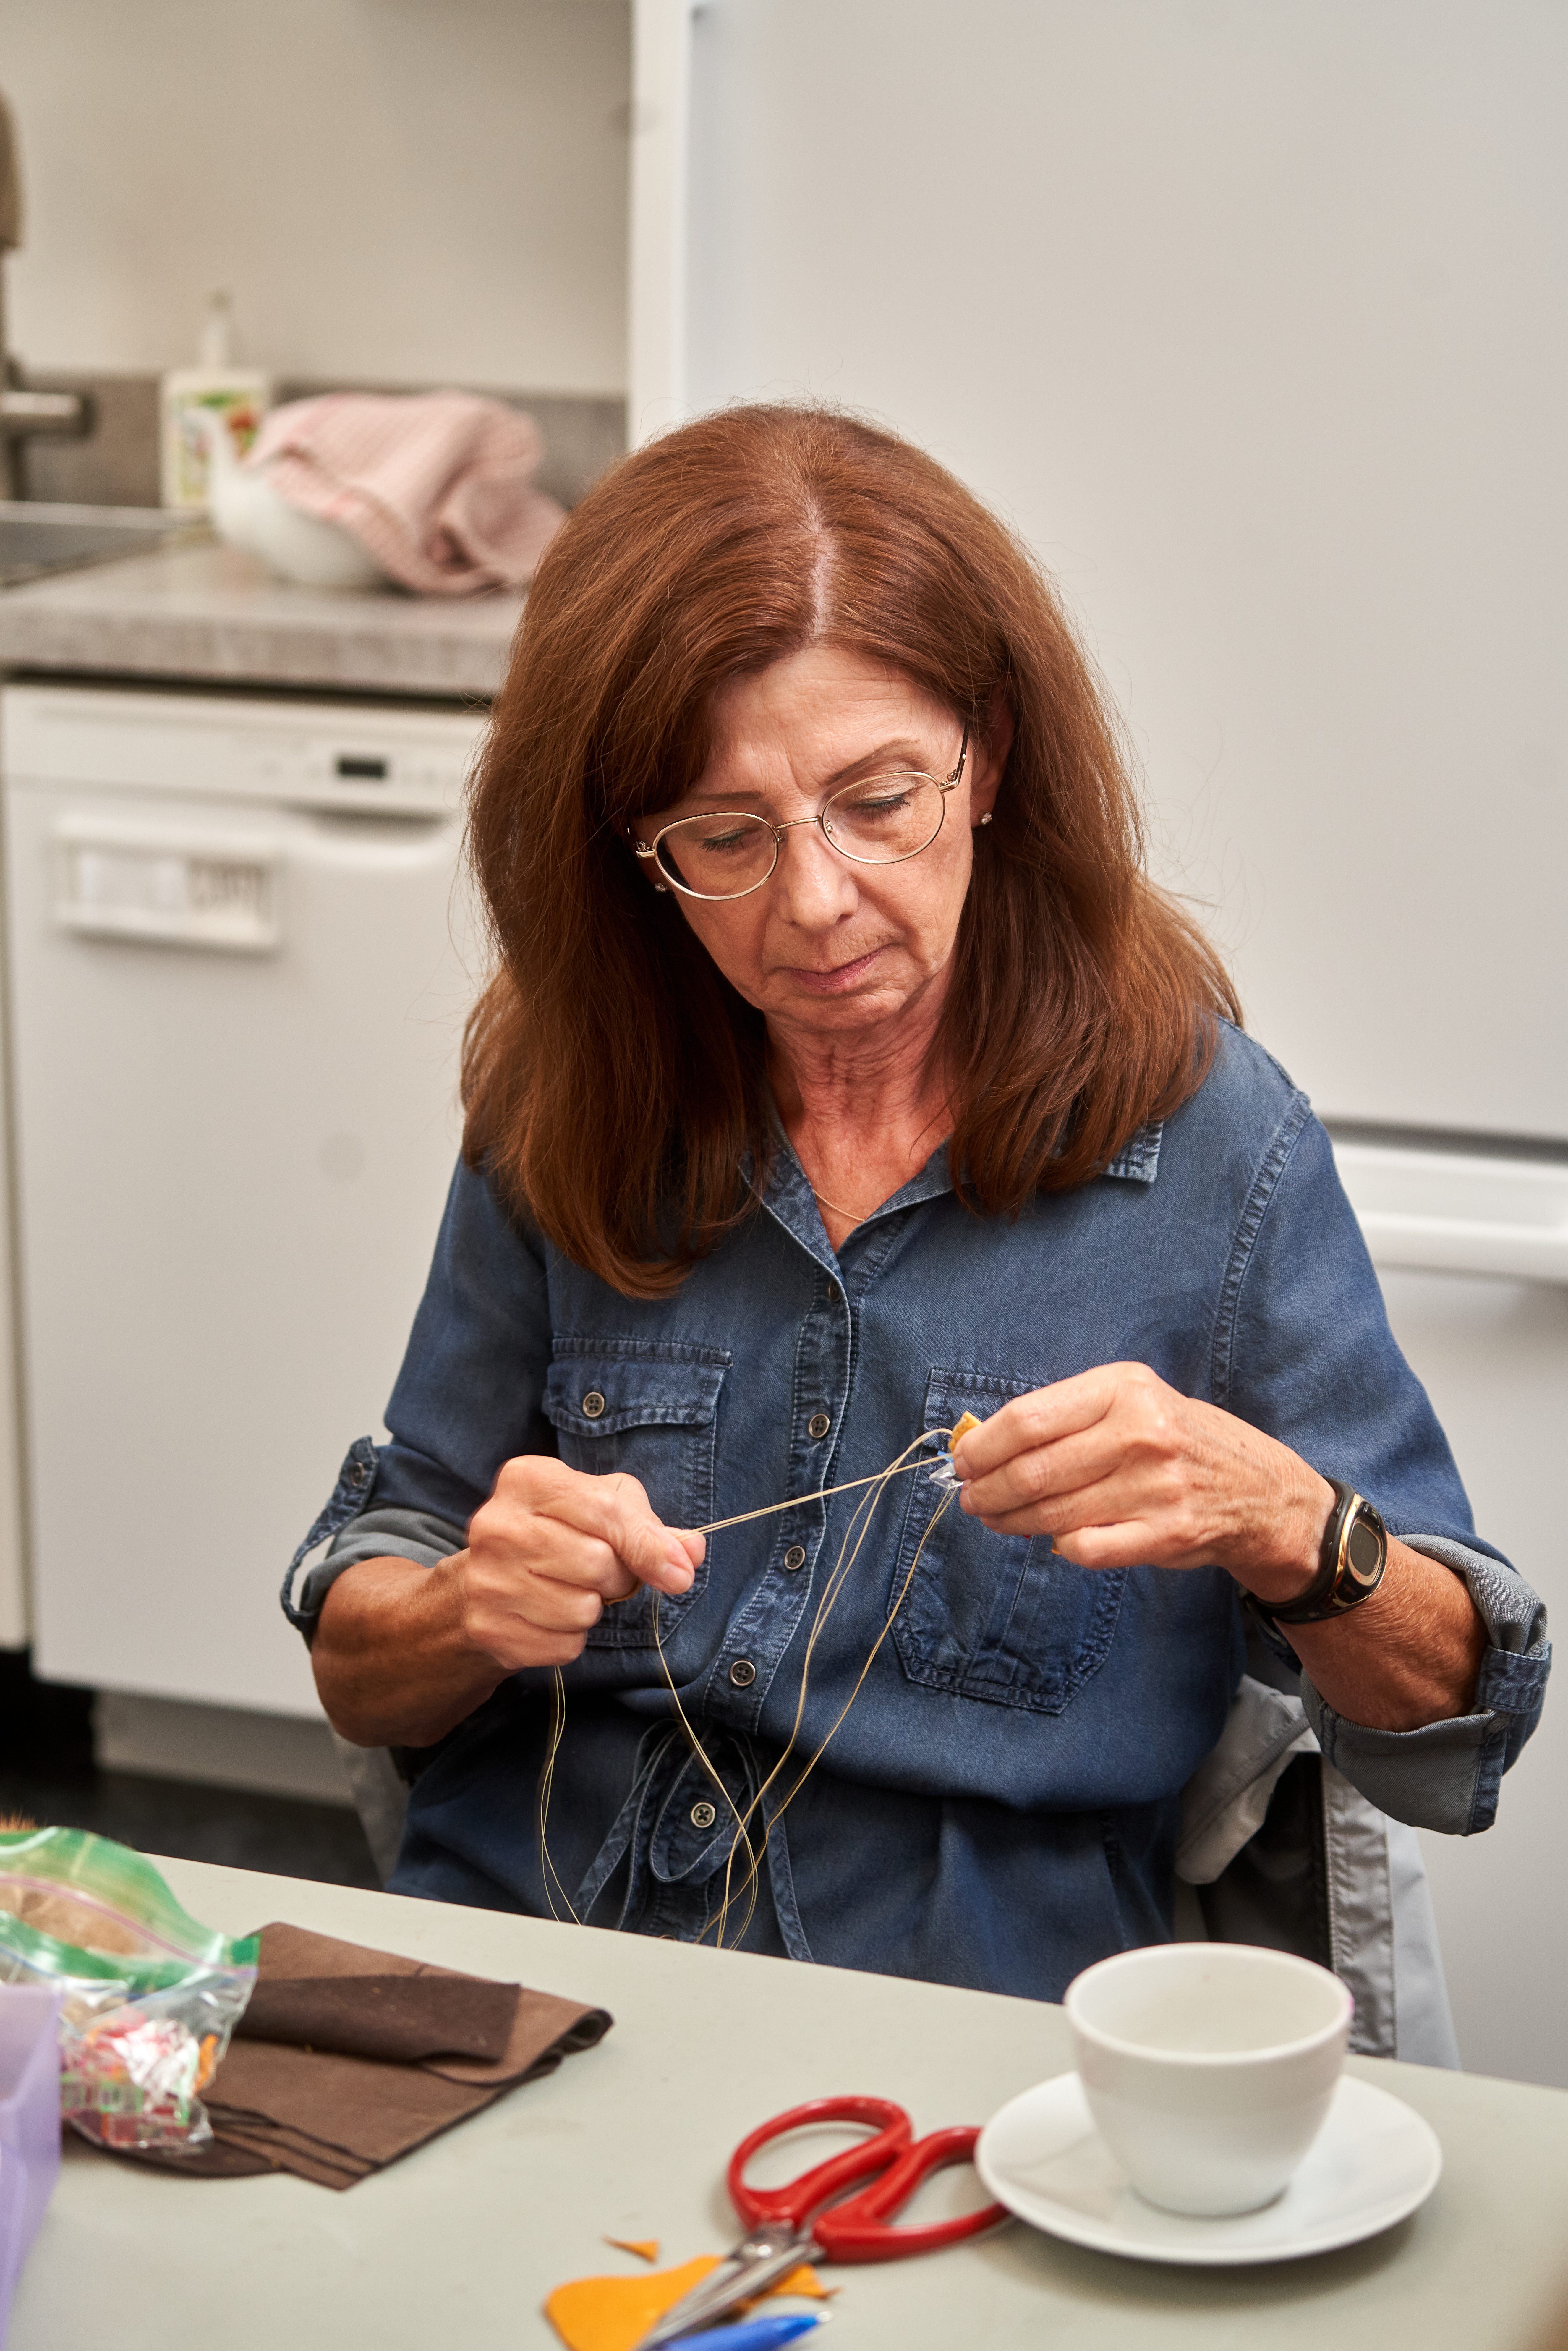 A woman in a denim shirt measures out a length of thread.